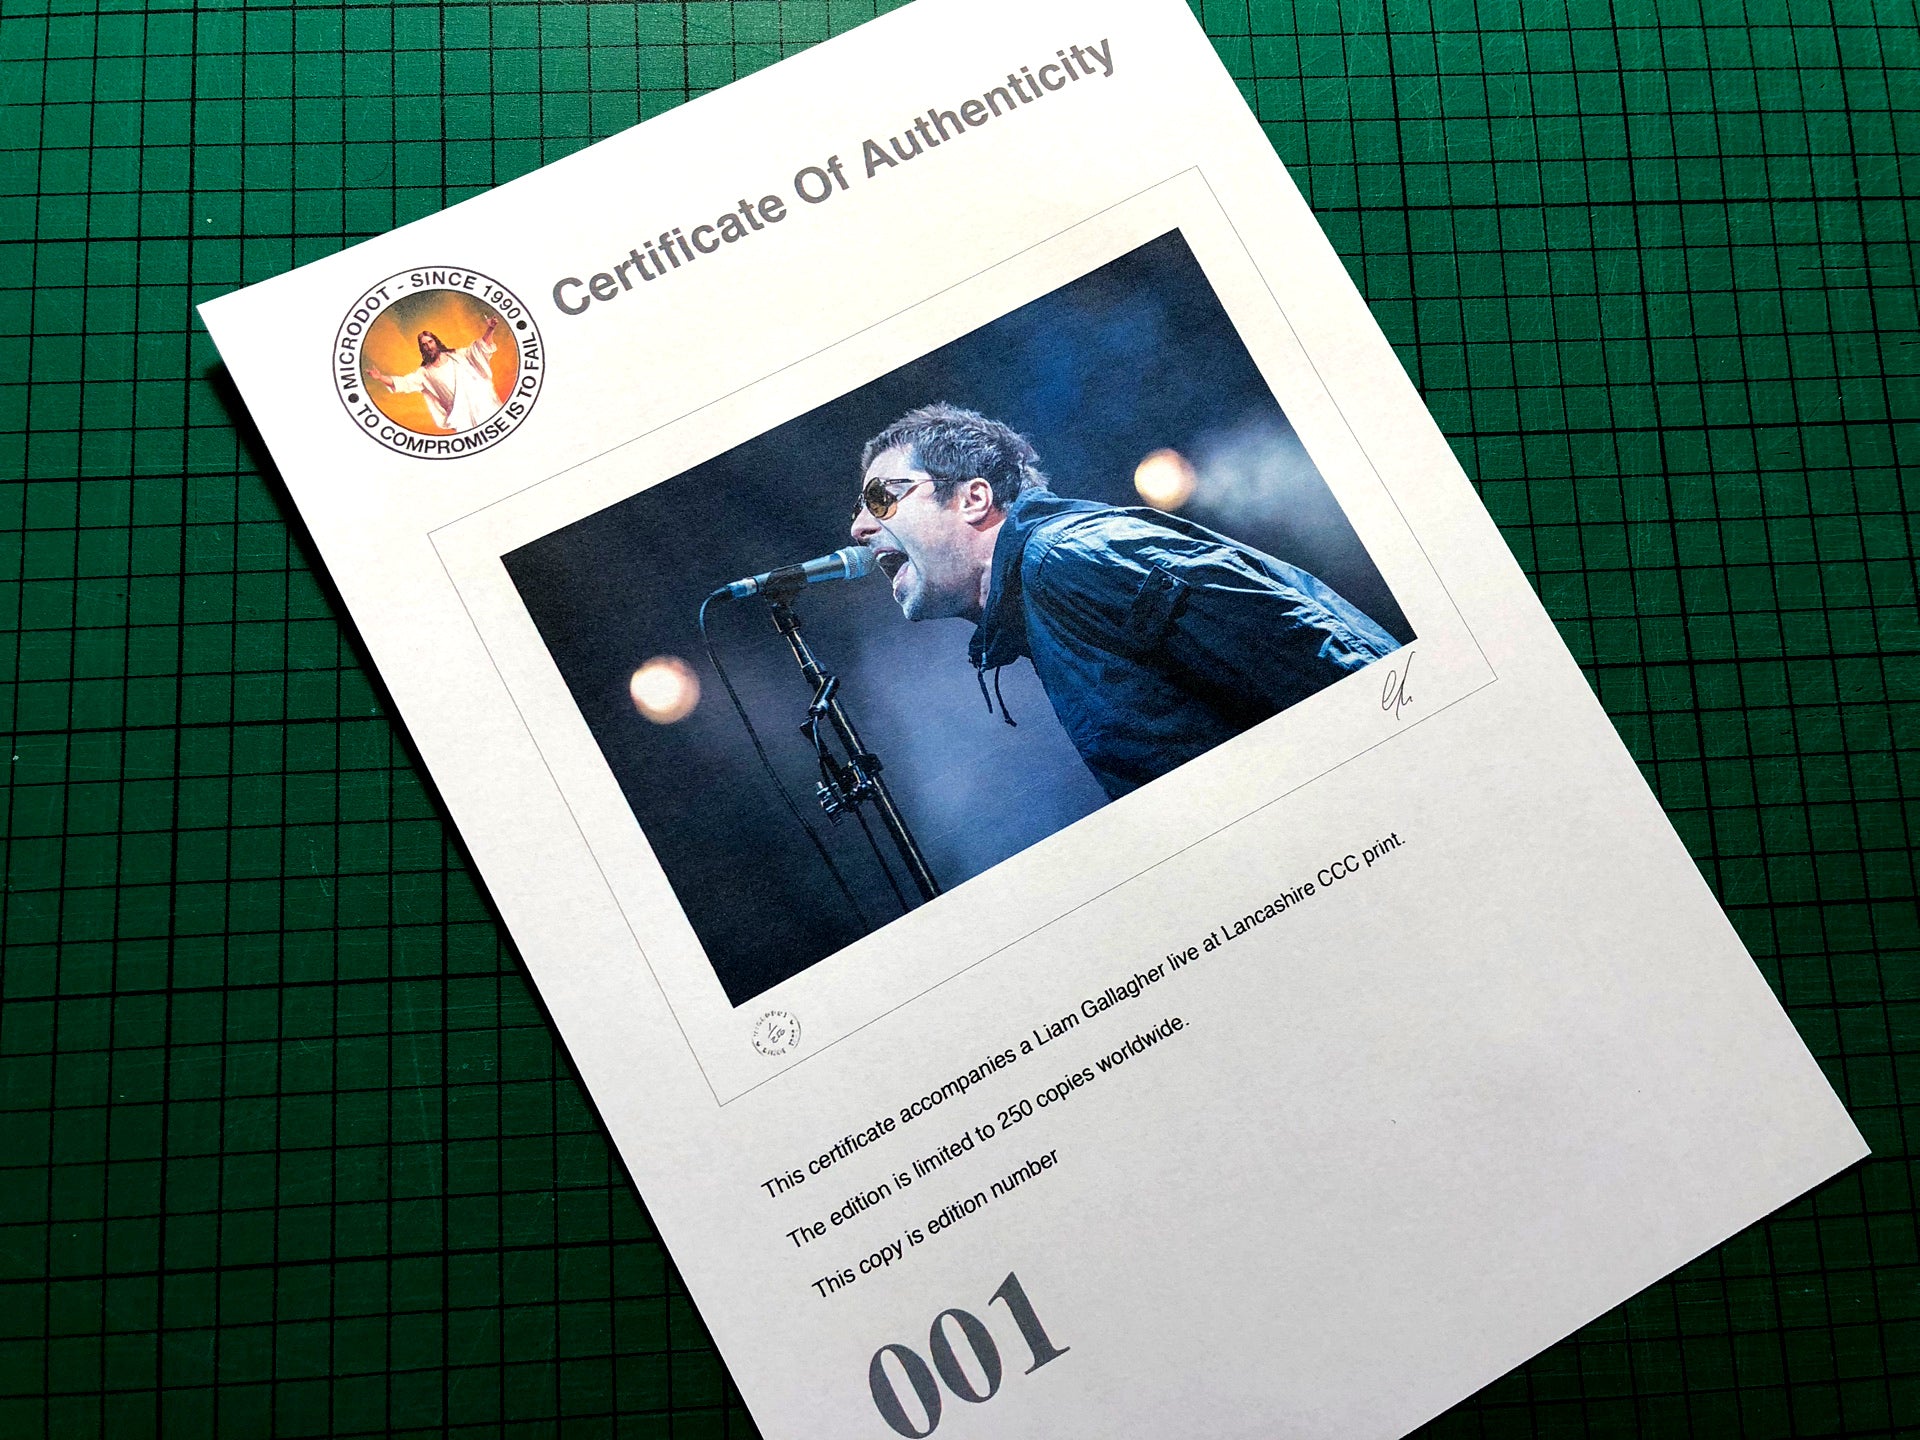 Liam Gallagher live at Lancashire County Cricket Club 2018 Print 2 - New Item